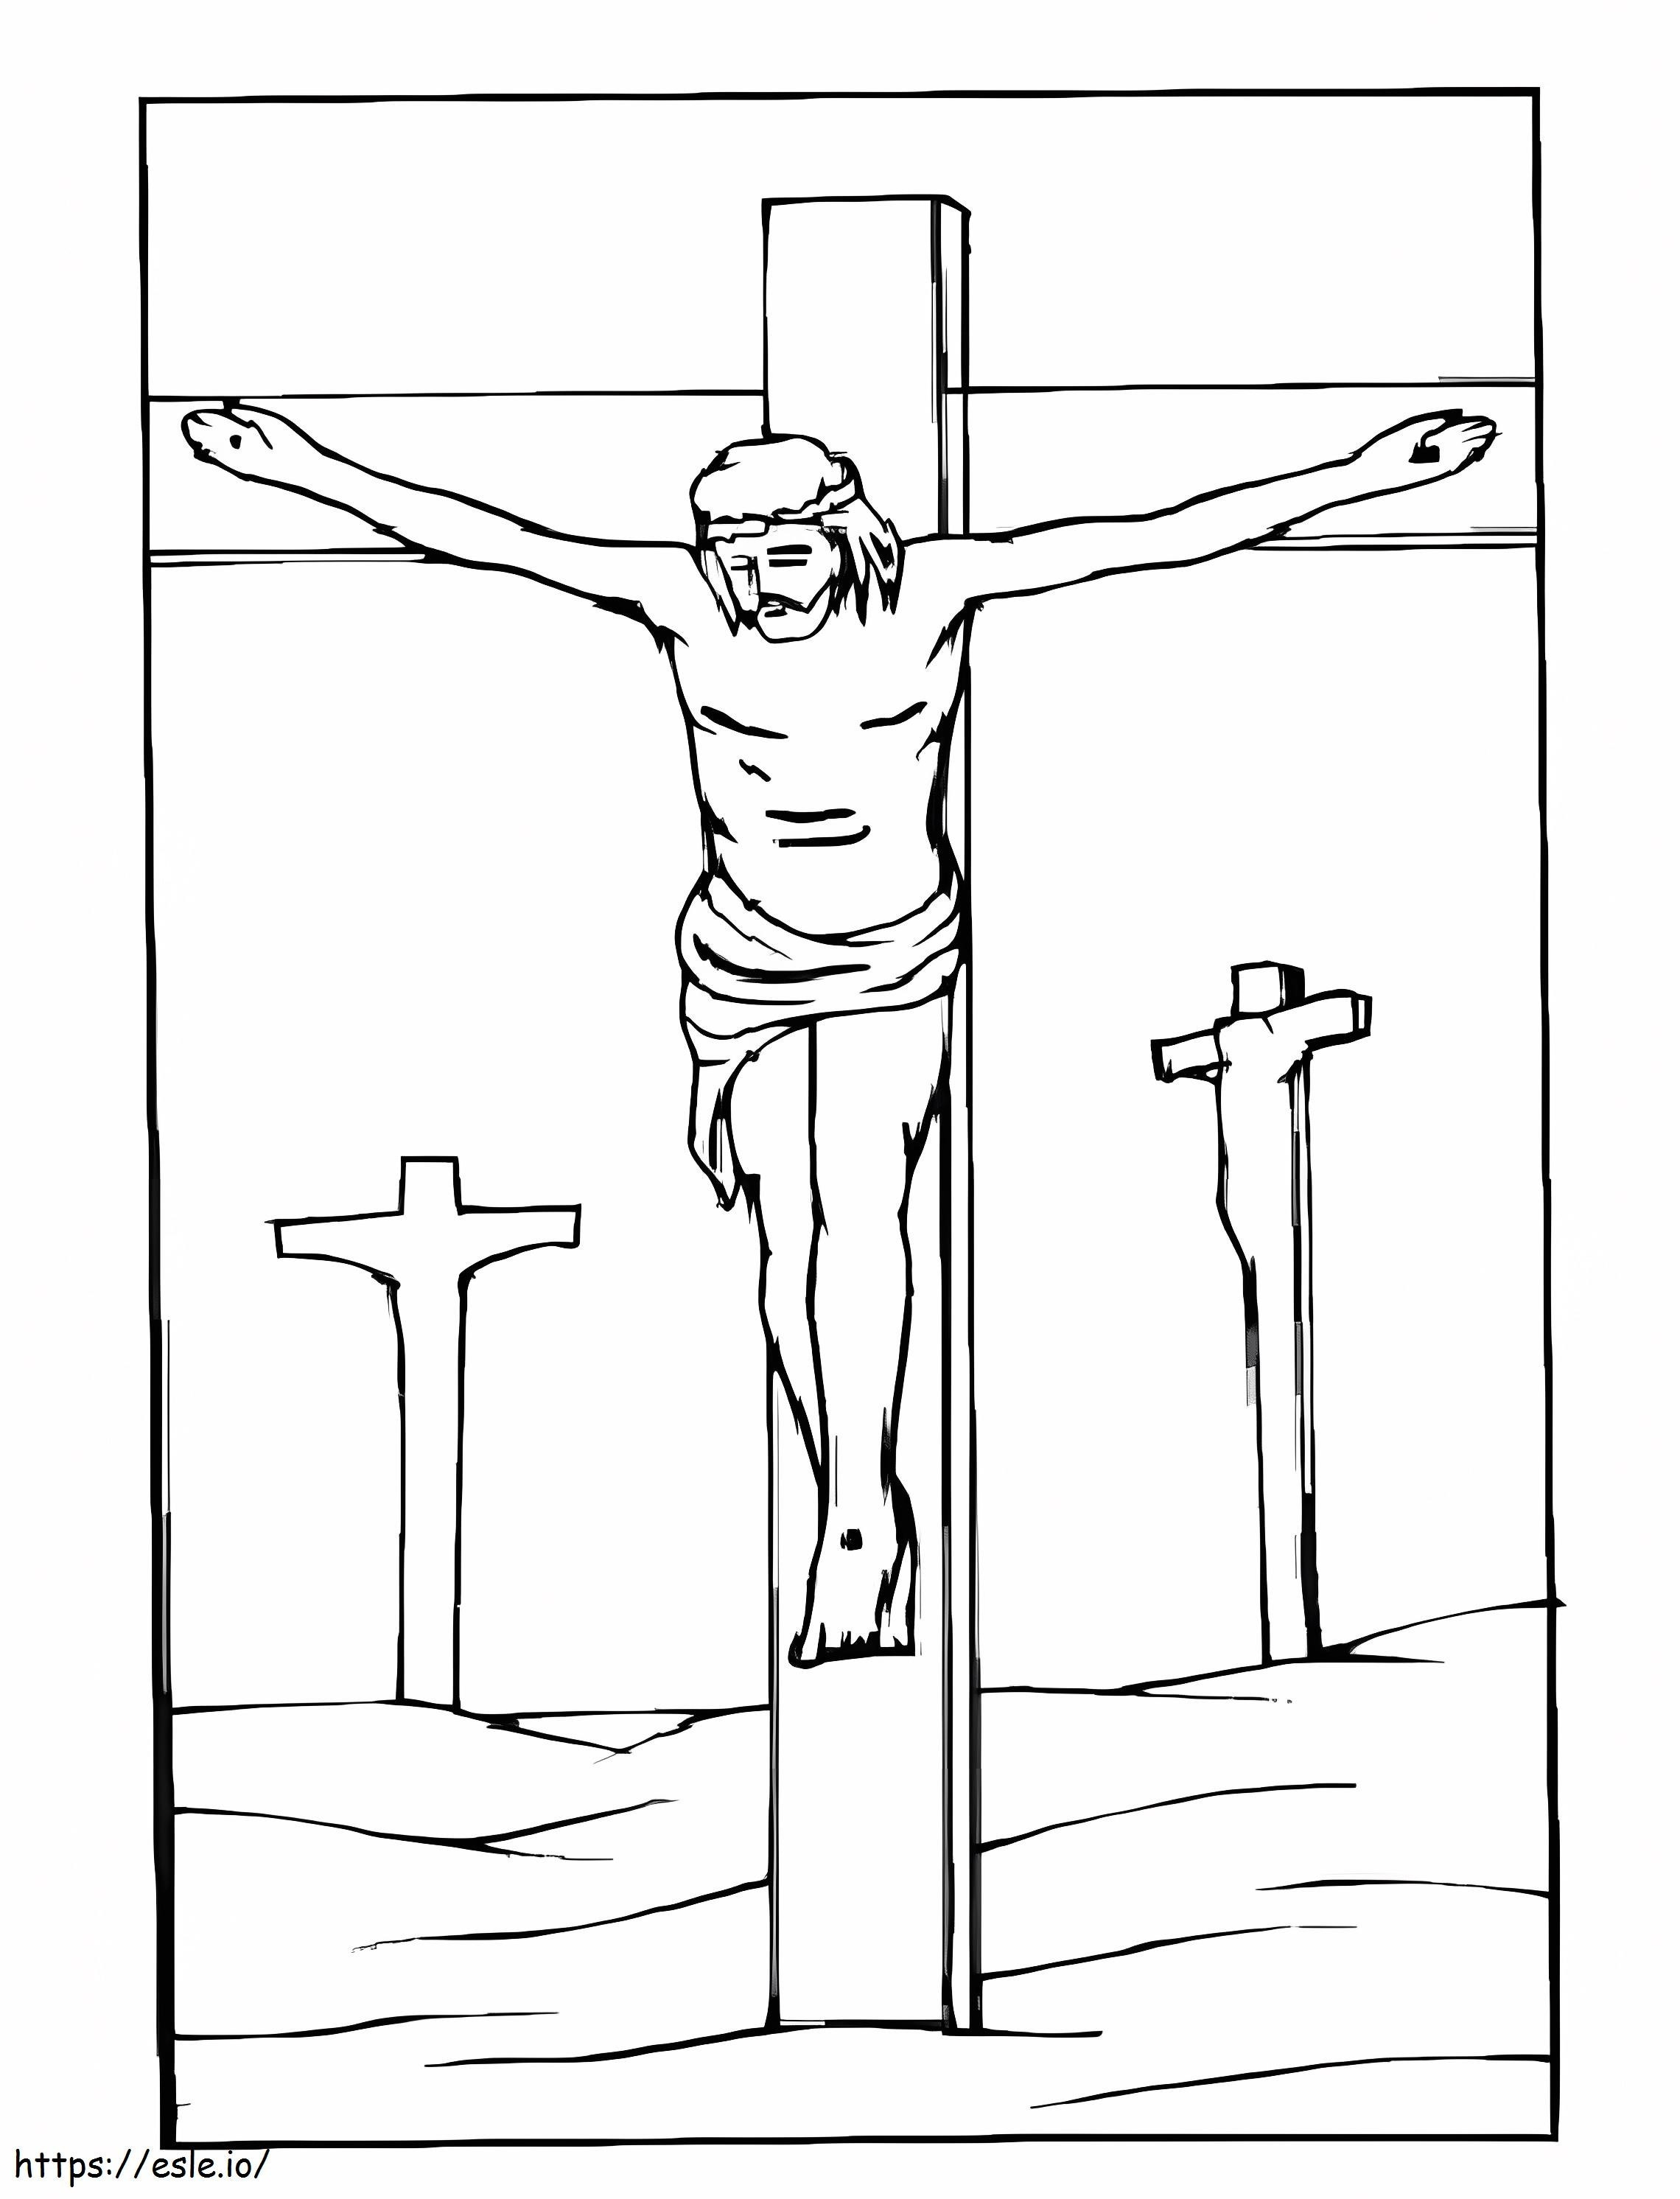 Good Friday 8 coloring page